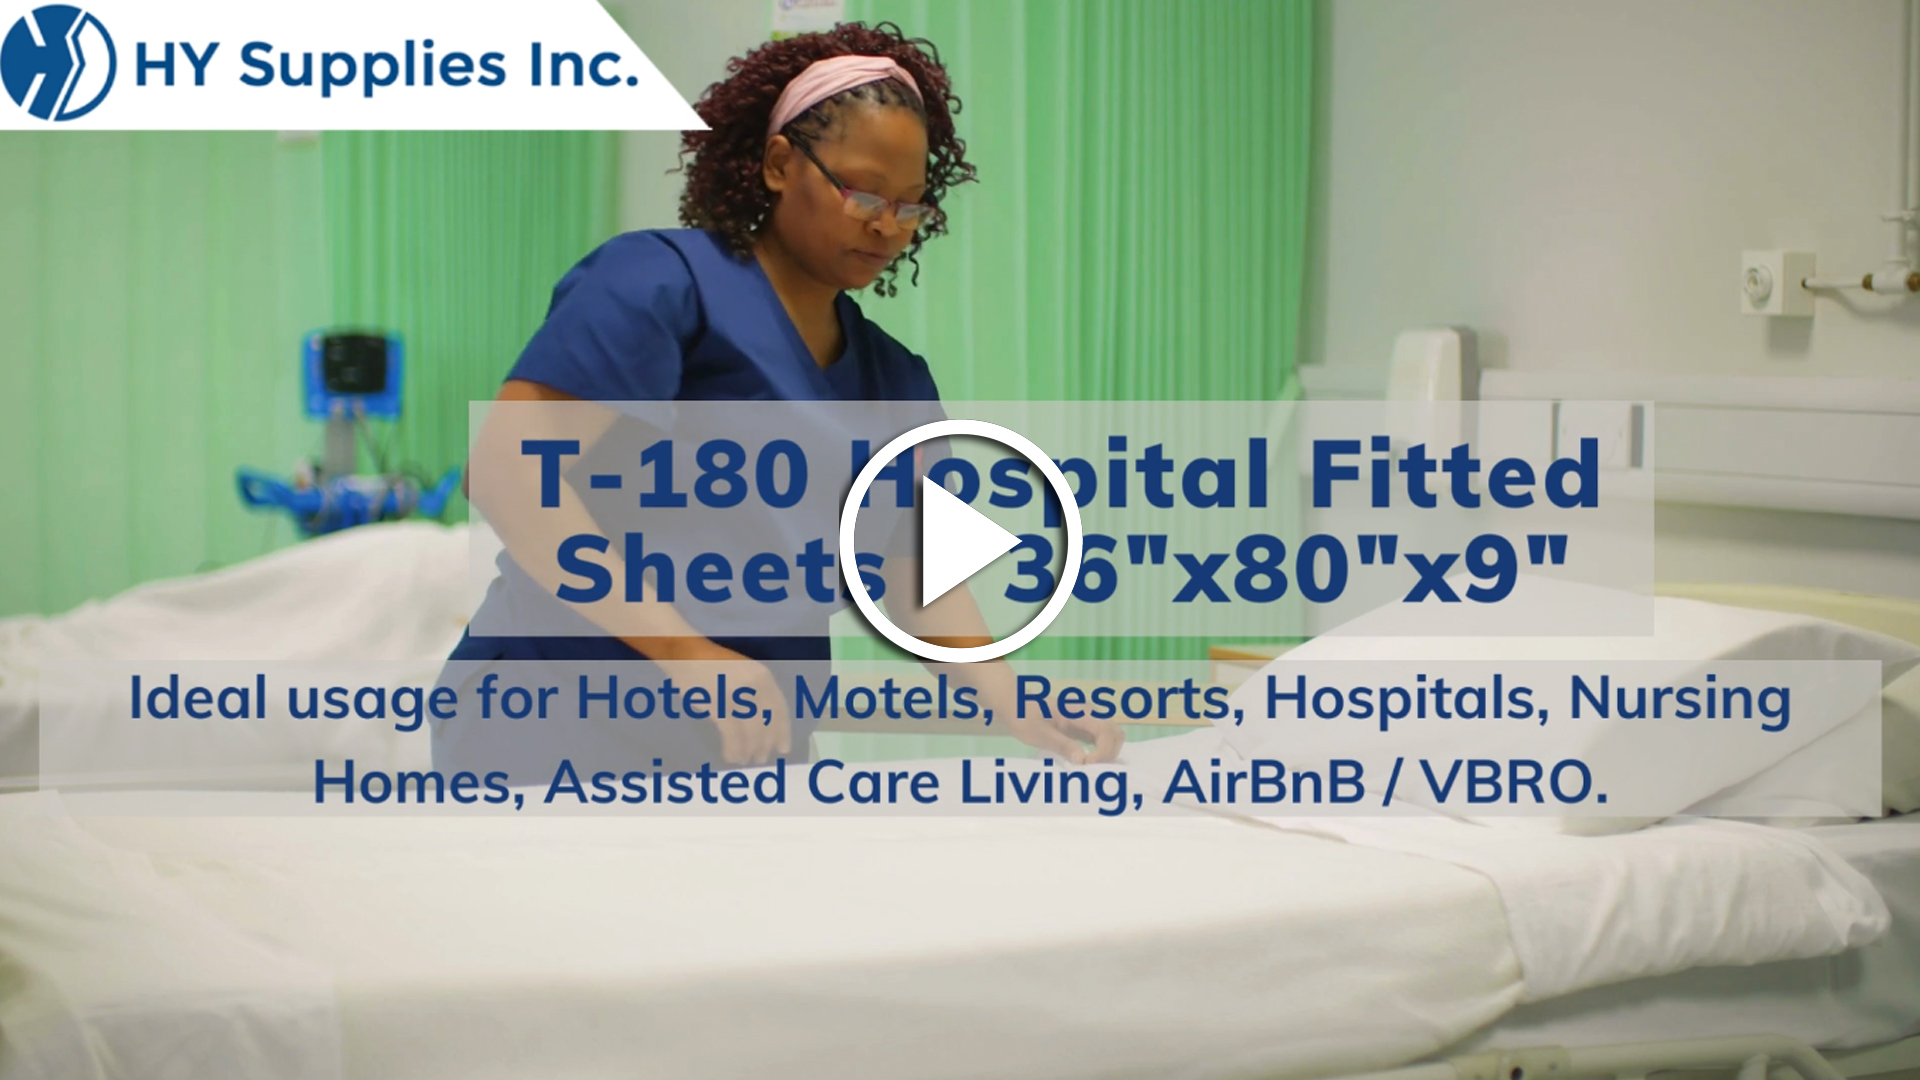 T-180 Hospital Fitted Sheets - 36"x80"x9"